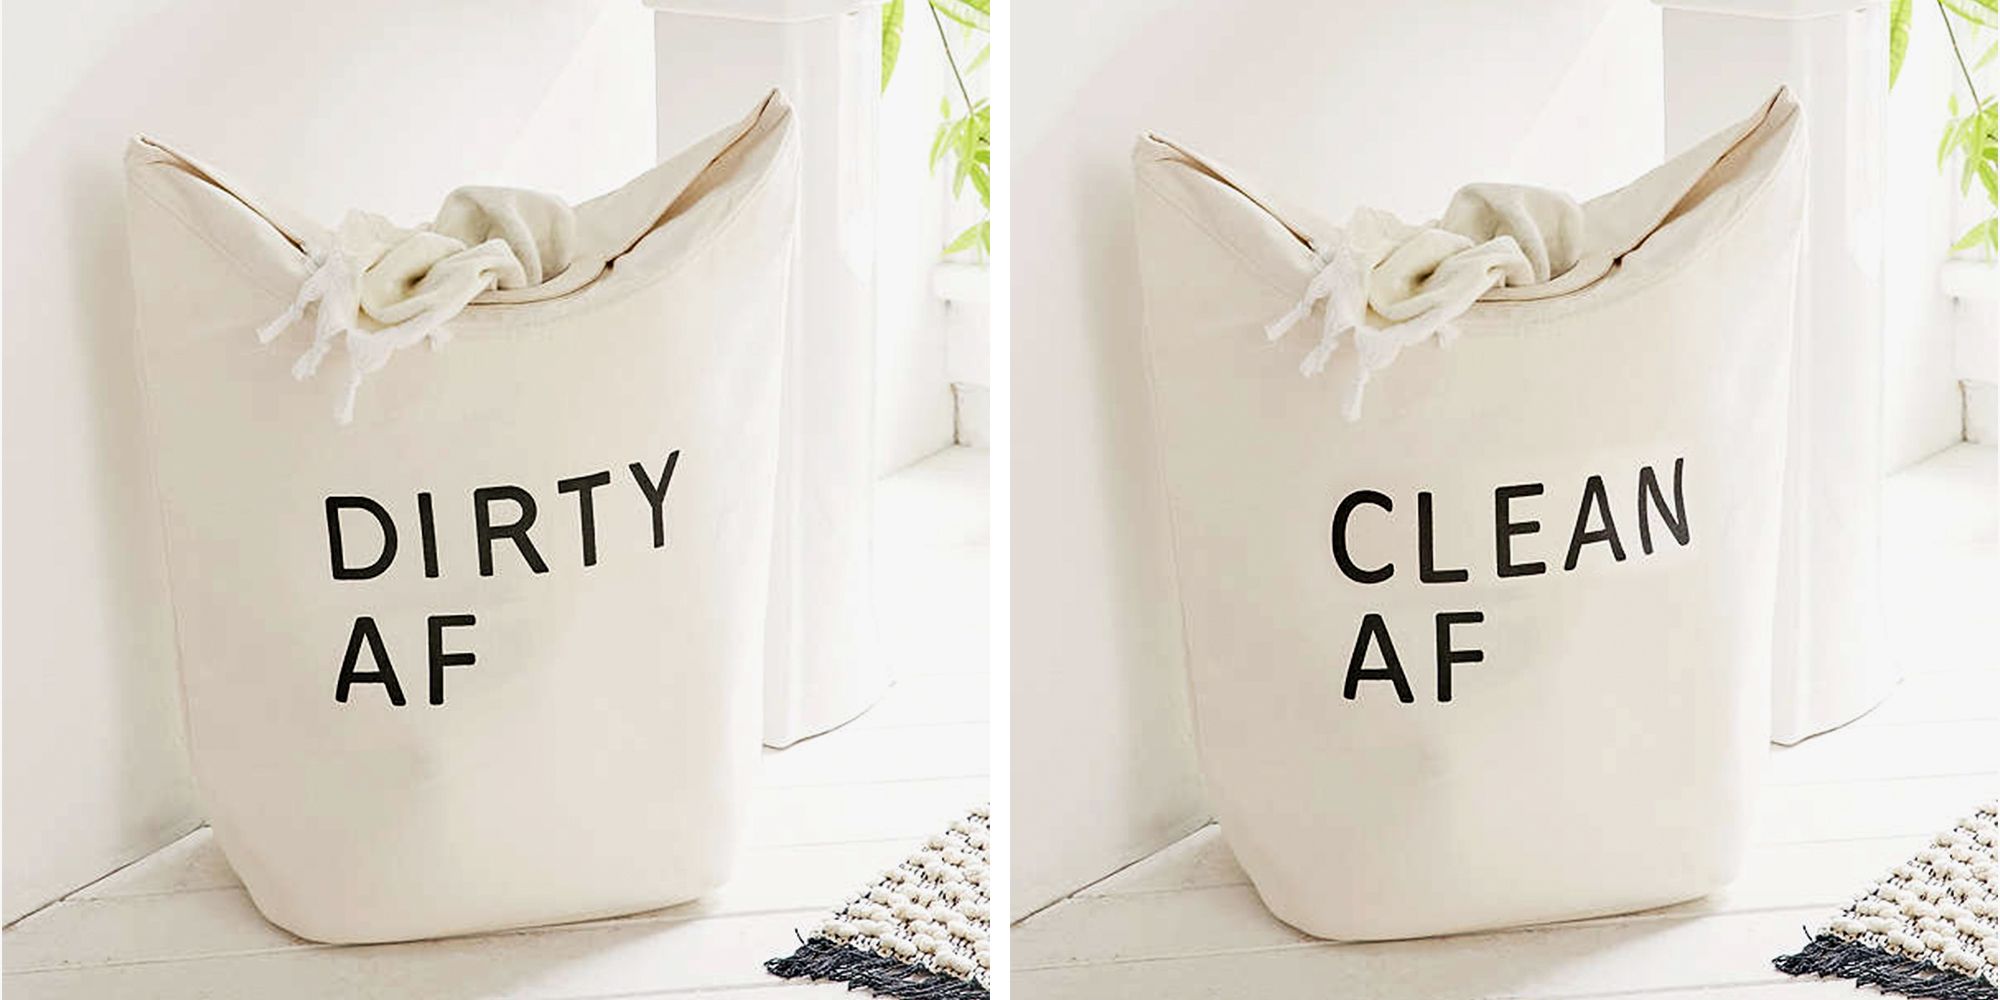 The Container Store Cotton Laundry Bag